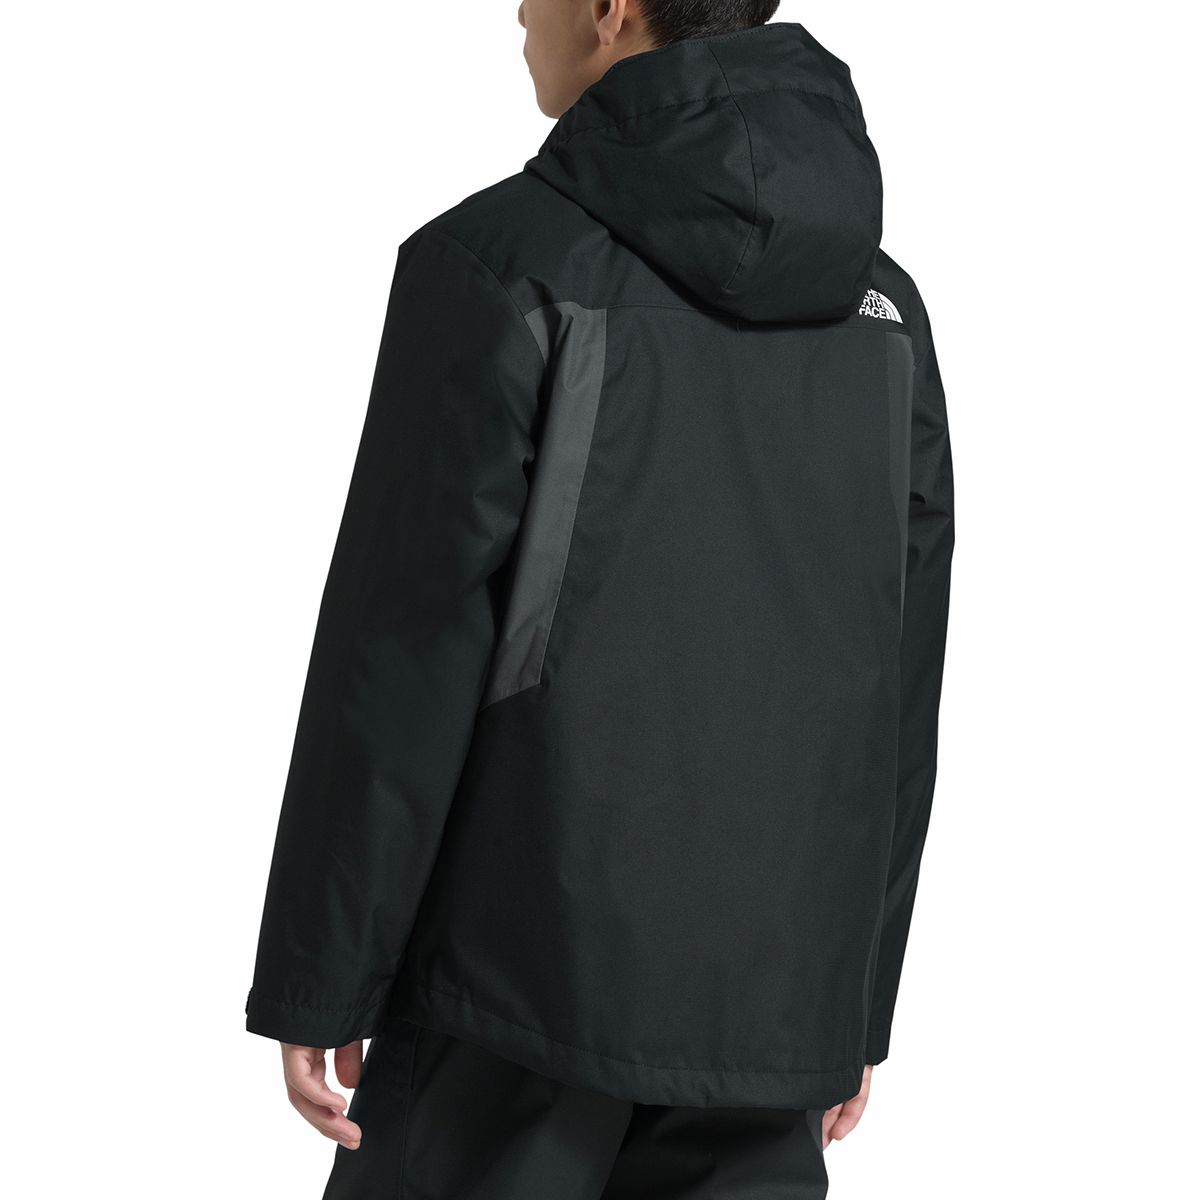 The North Face Clement Triclimate Jacket - Boys' | Backcountry.com